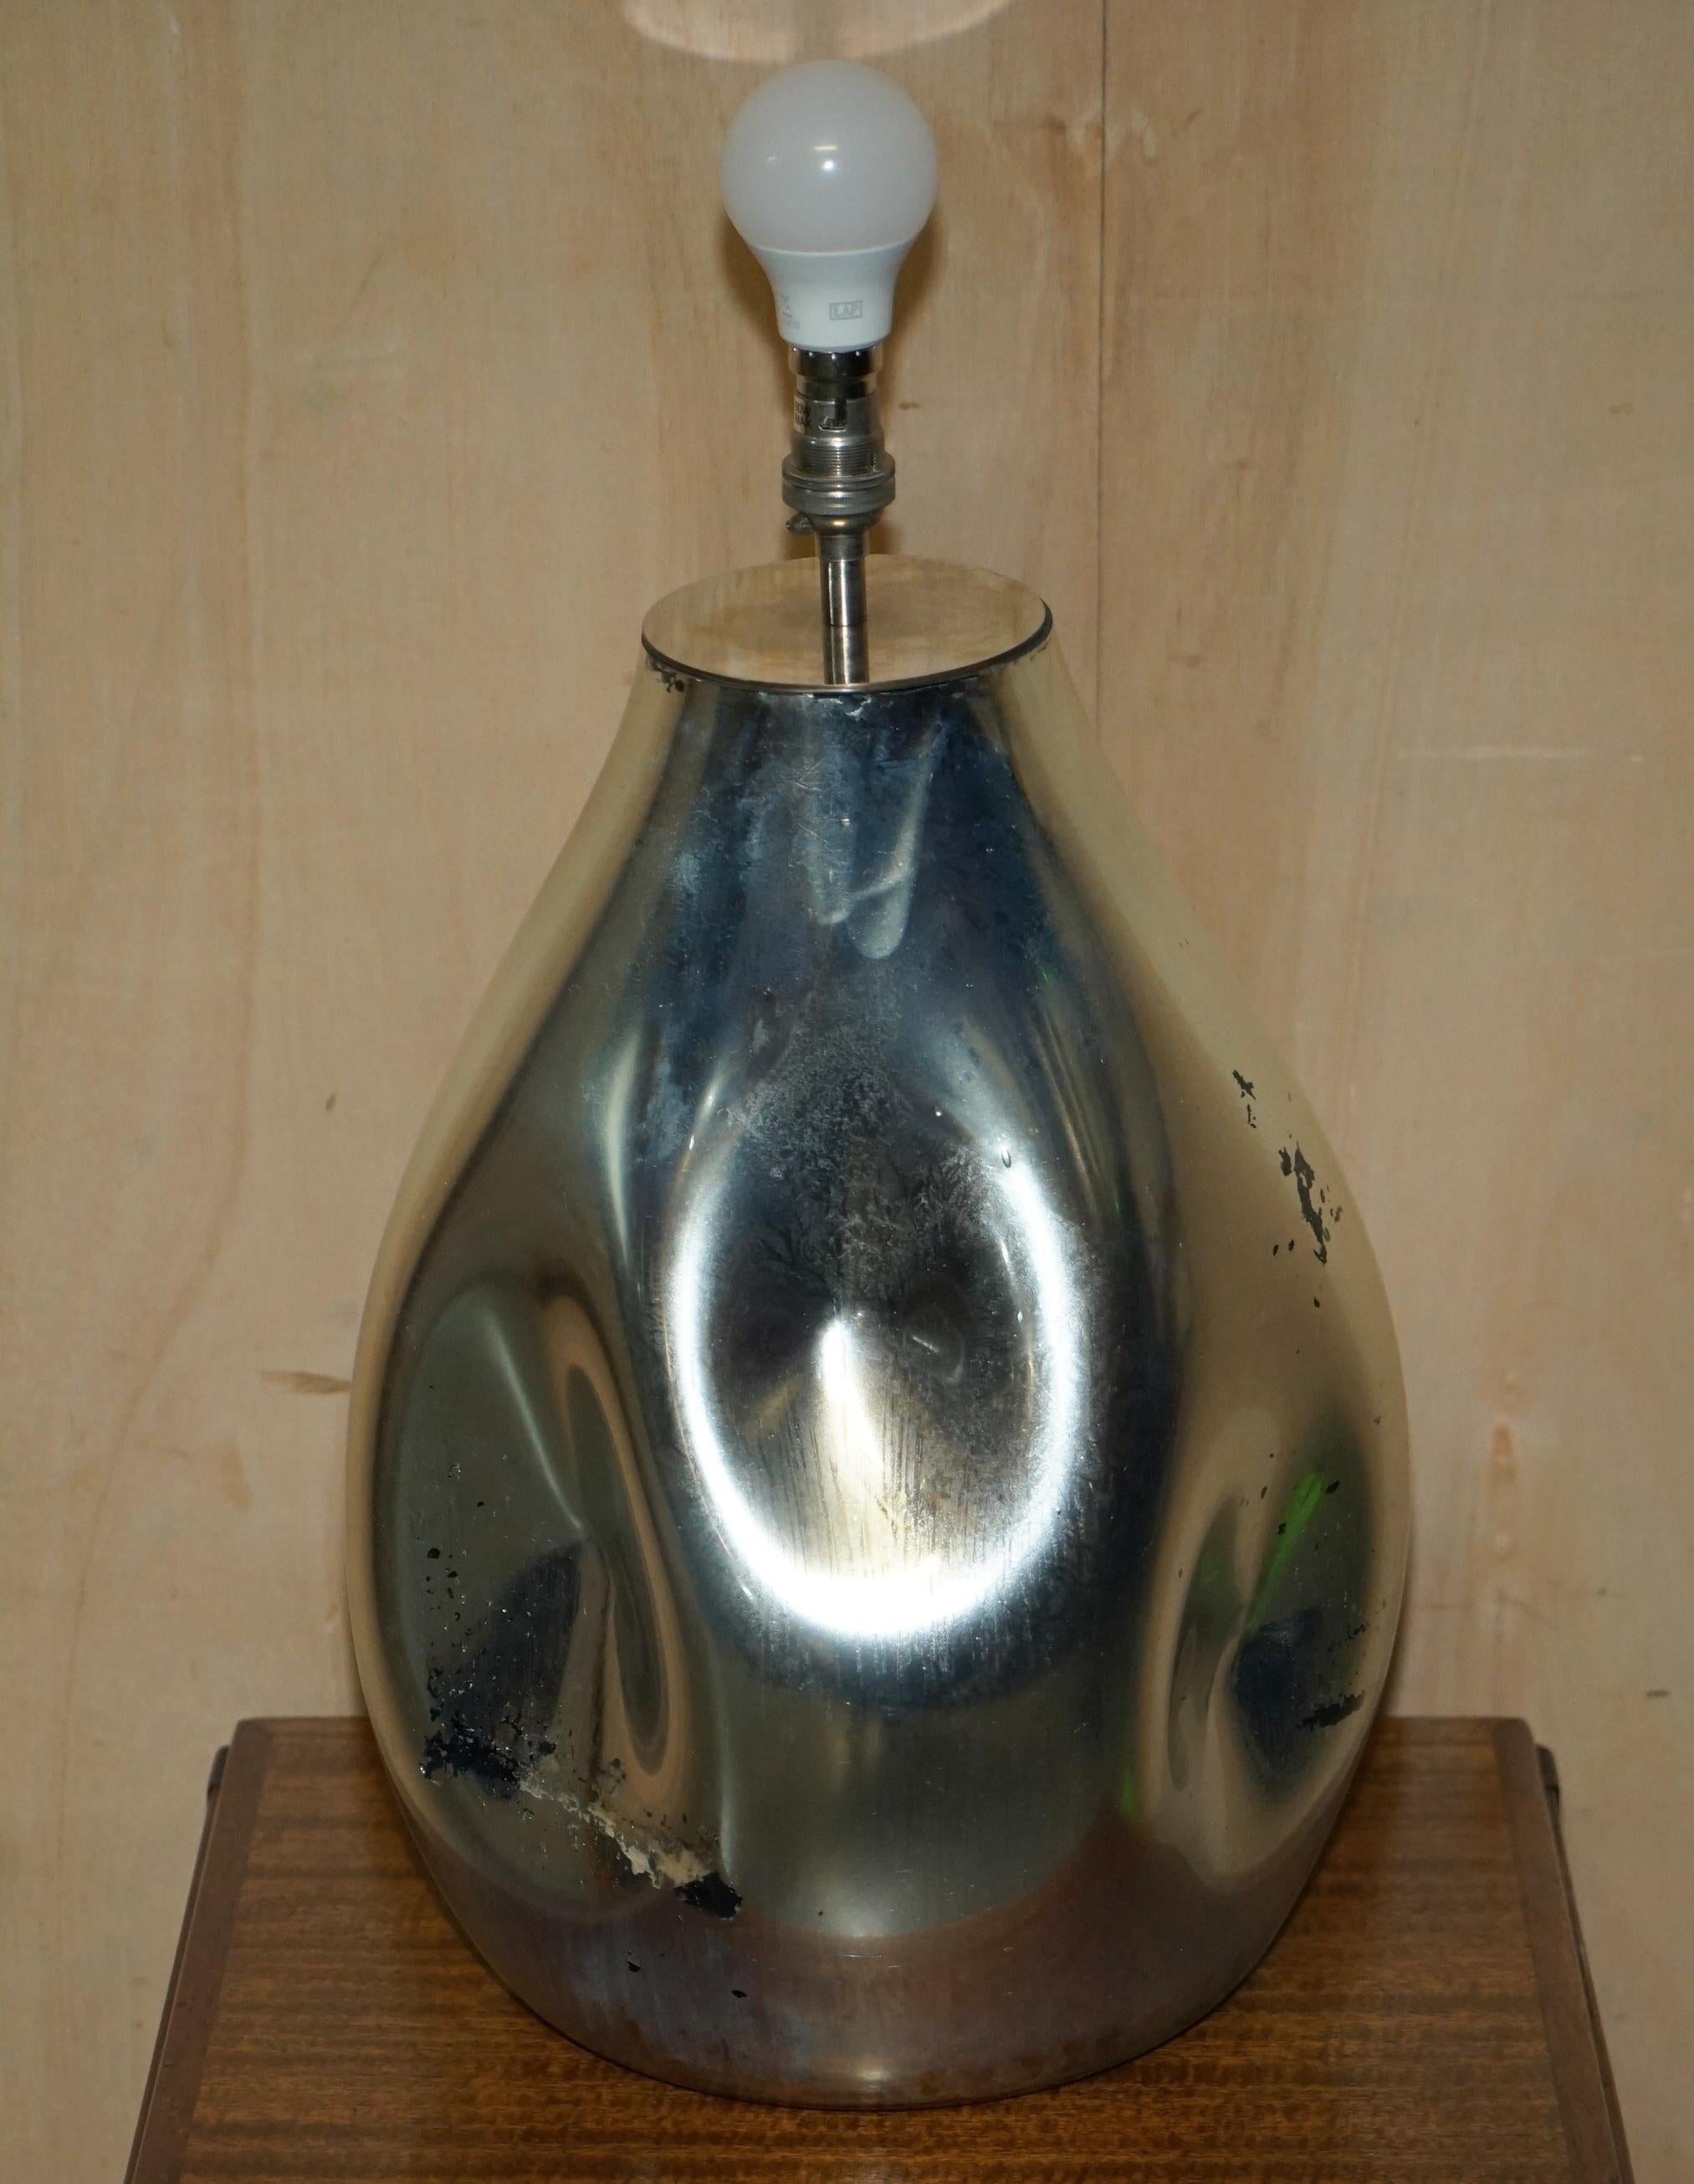 We are delighted to offer for sale this stunning vintage mirrored foxed glass large artistic sculptural table lamp

This lamp is solid mirrored glass which due to age, has some very desirable foxing in places, it looks like metal but is pure